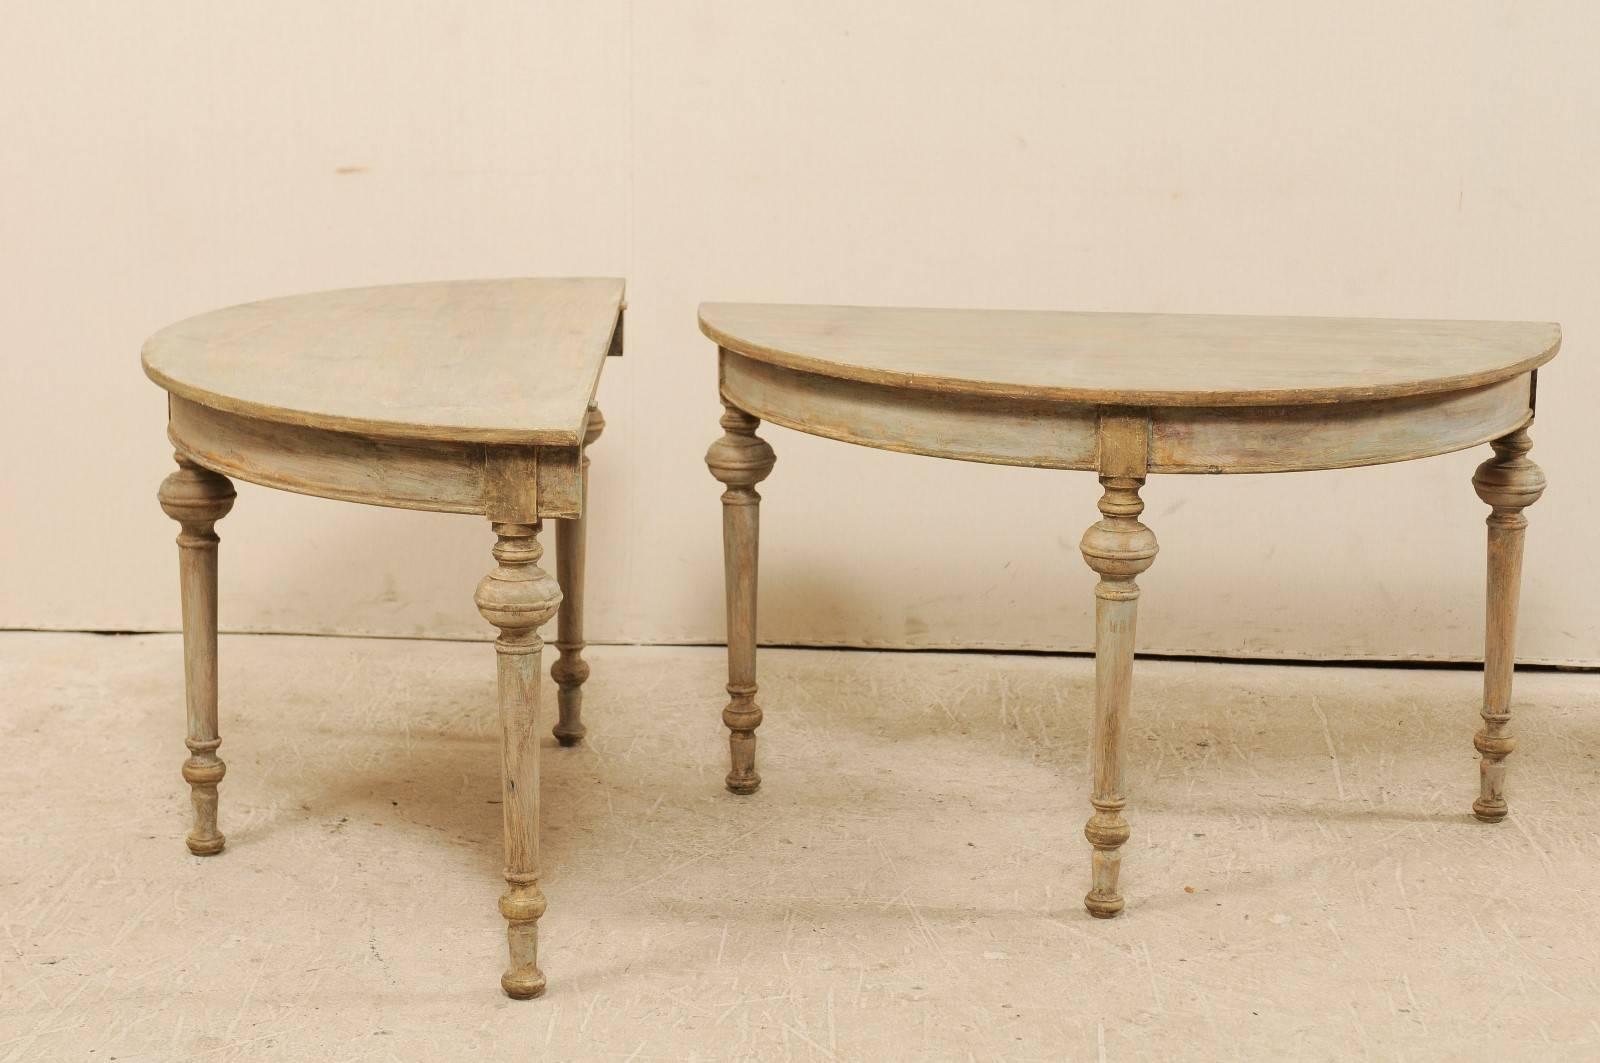 Pair of Swedish Painted Wood Demi Lune Tables with Round Turned and Tapered Legs 1